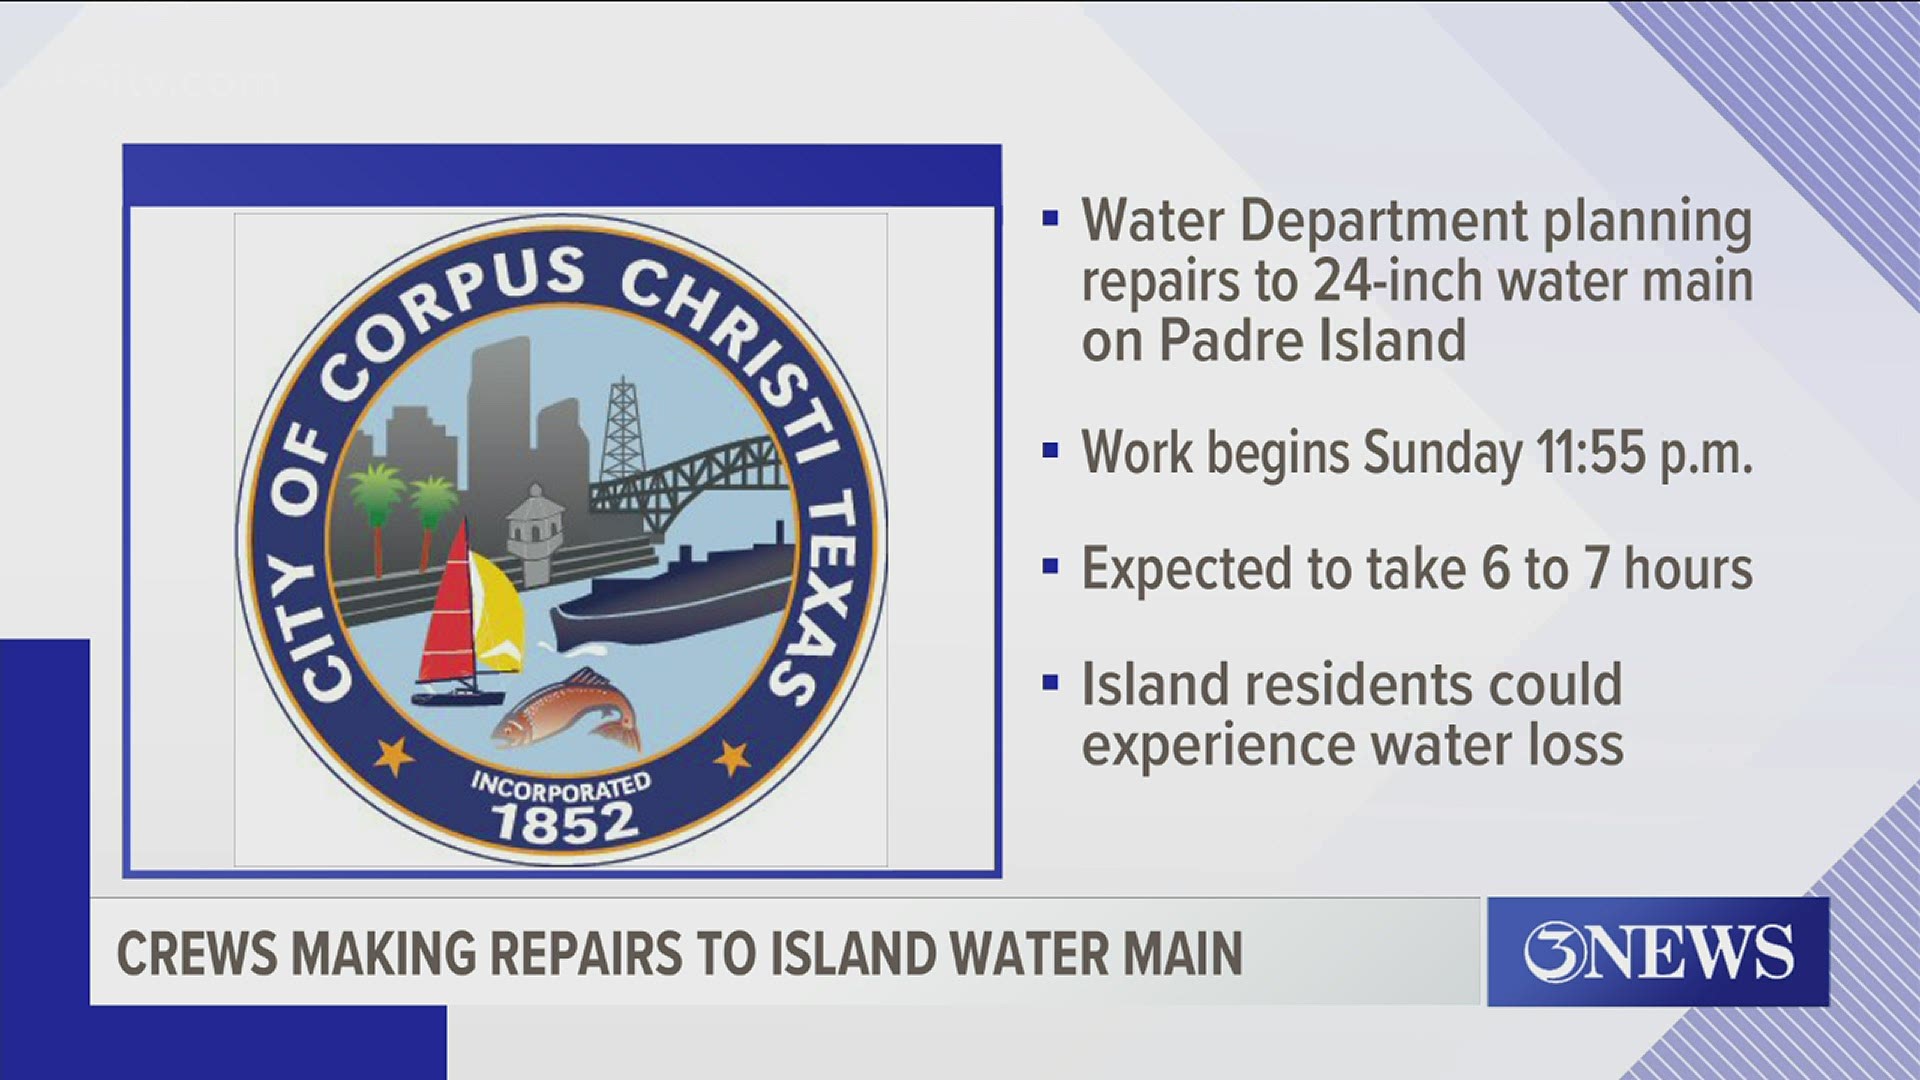 Residents on The Island should be prepared for a possible disruption in water services beginning Sunday night.